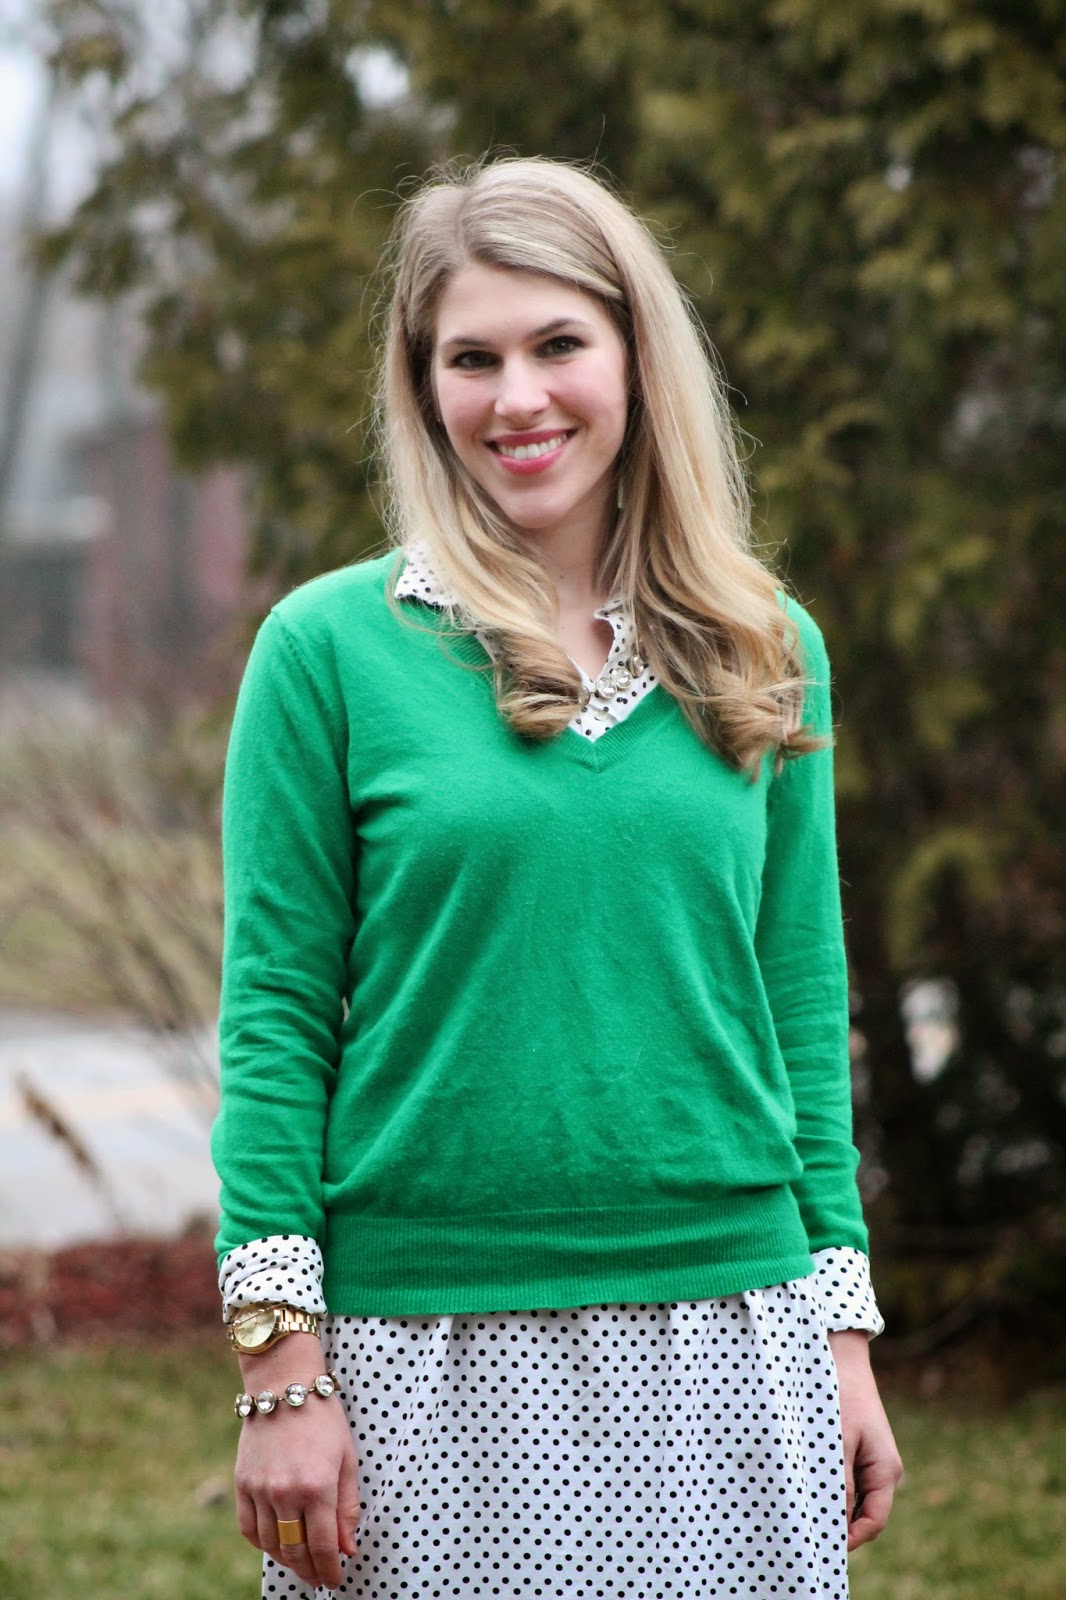 I do deClaire: Polka Dot dress and Green Sweater